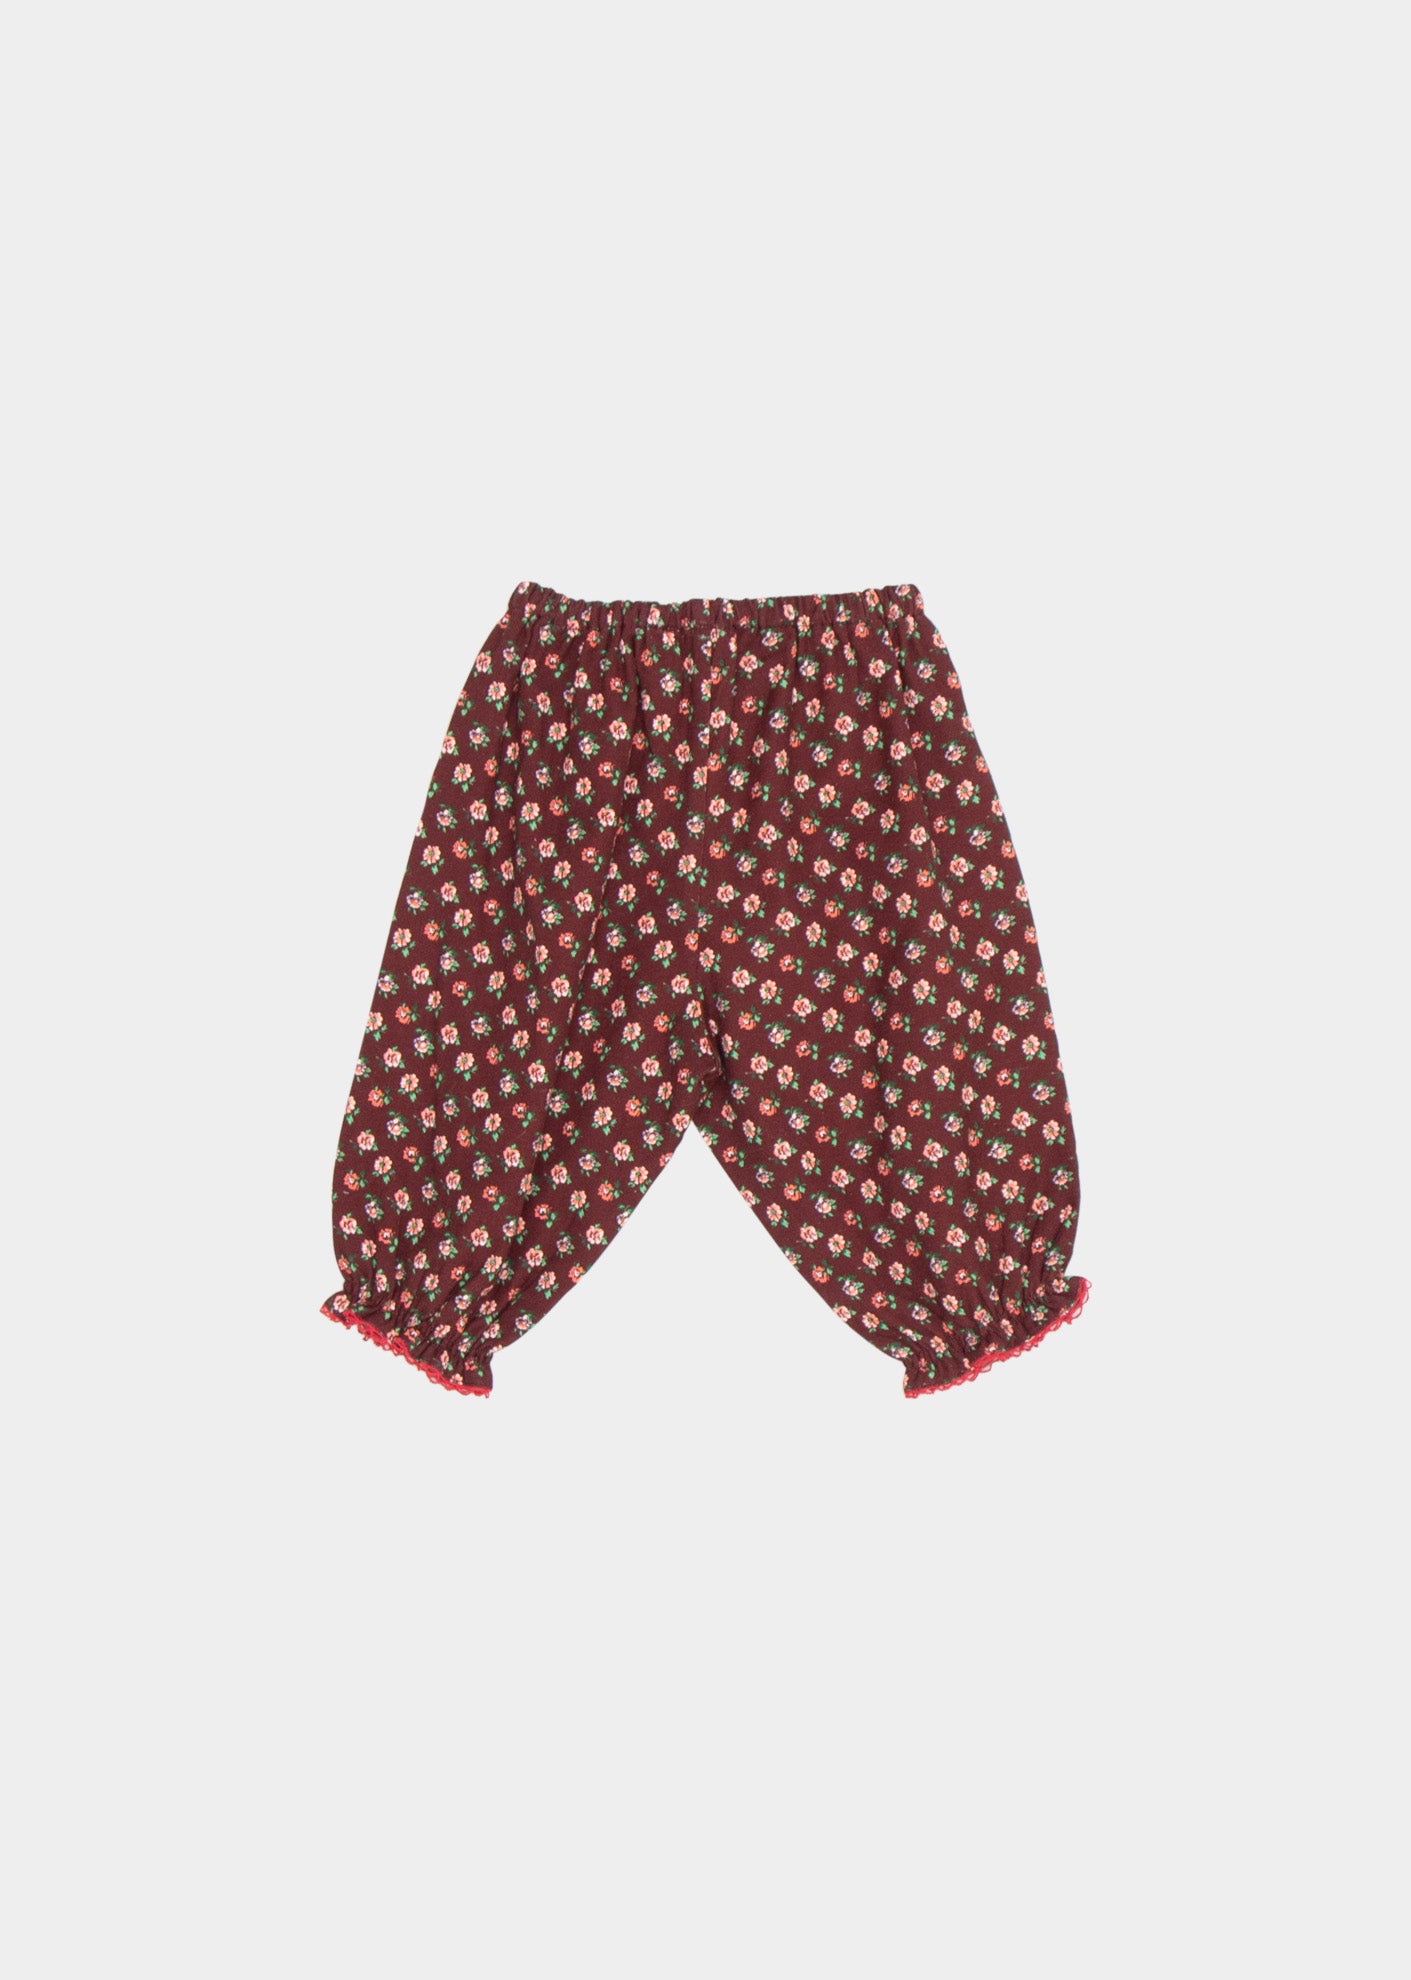 ARNICA BABY TROUSER - CHOCOLATE FLORAL